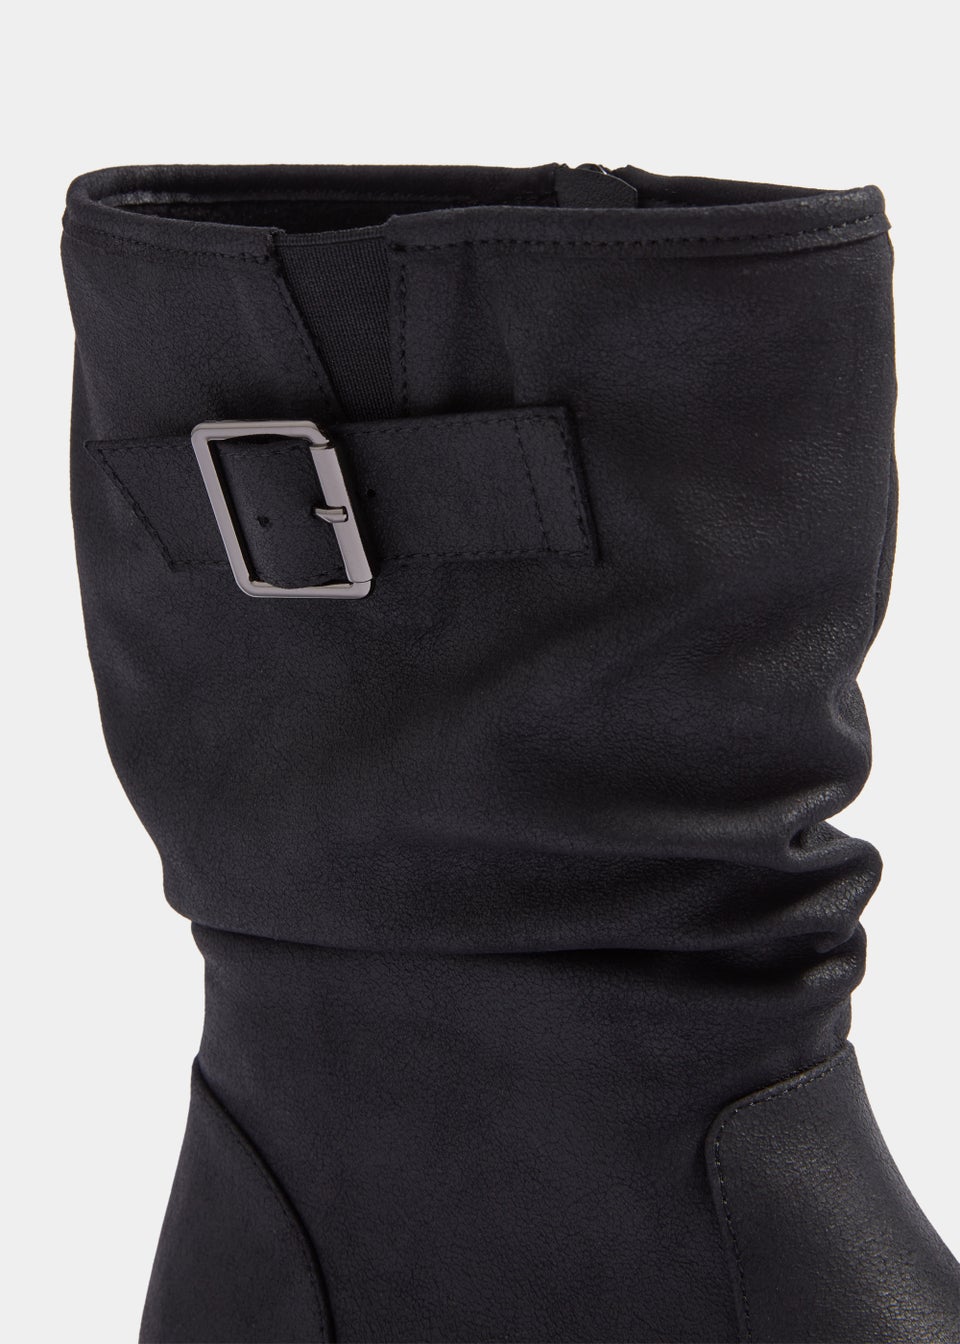 Black Slouch Cleated Boots